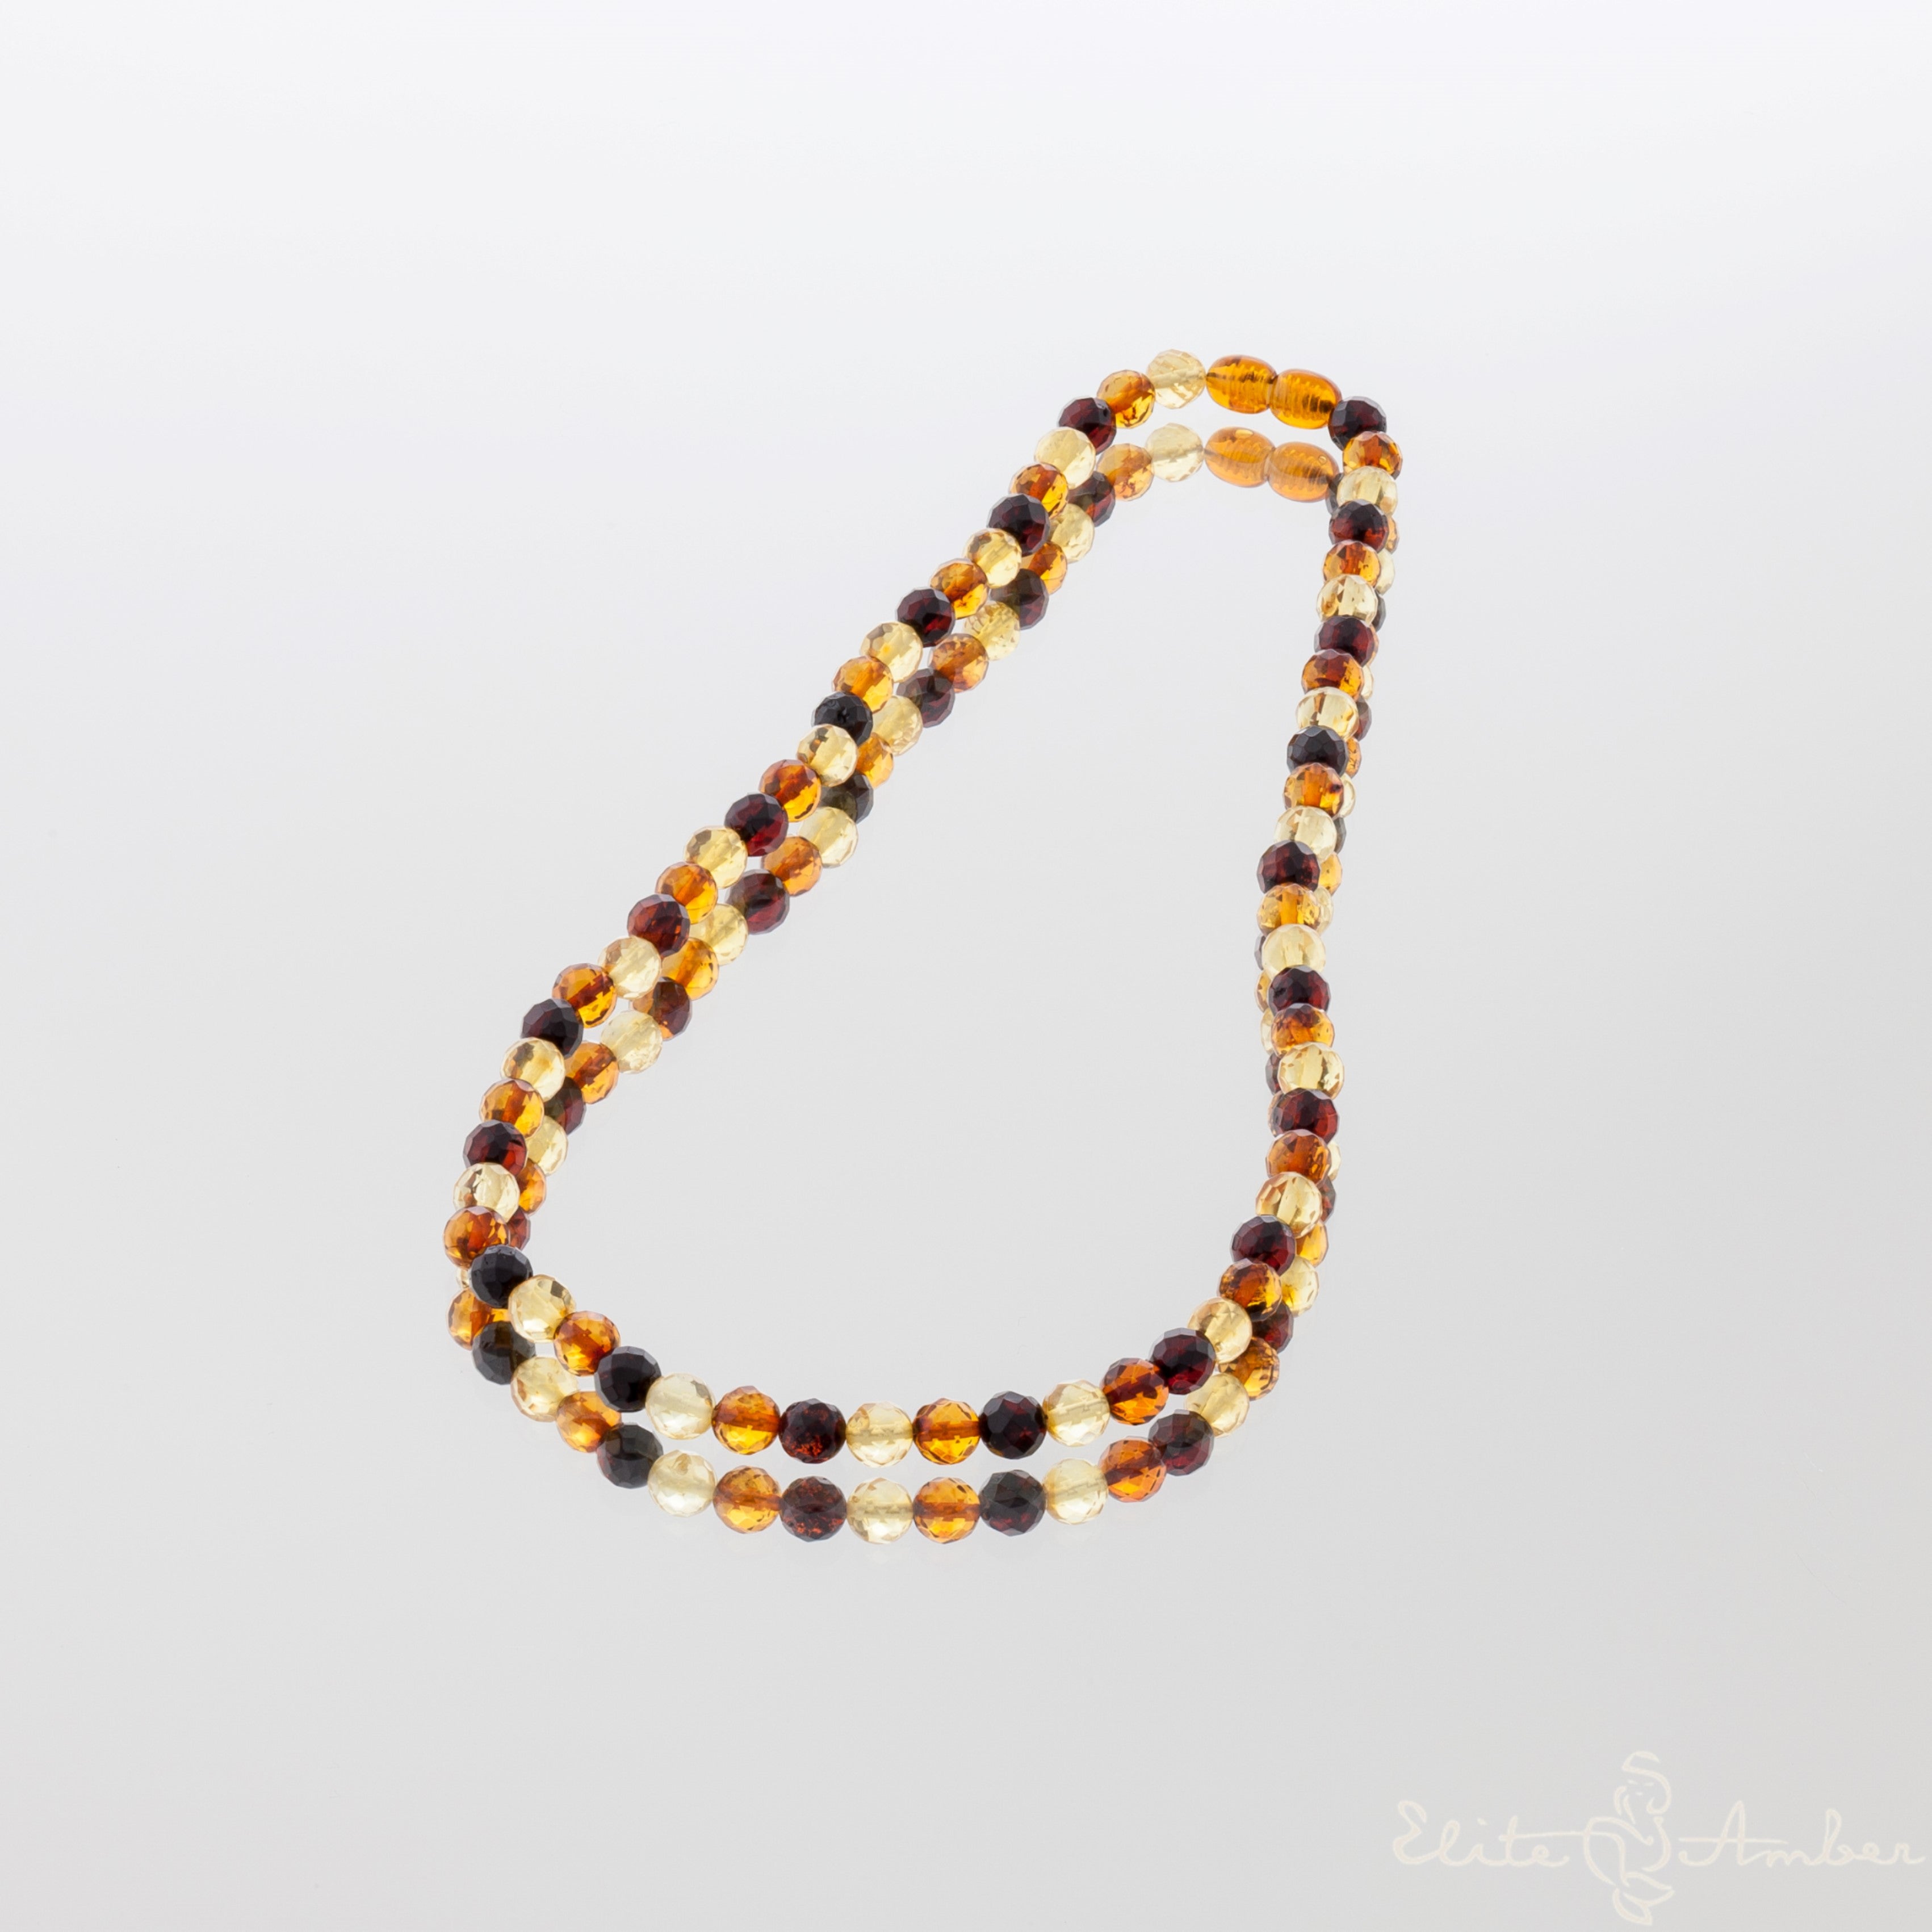 Amber necklace "Glossy colors"